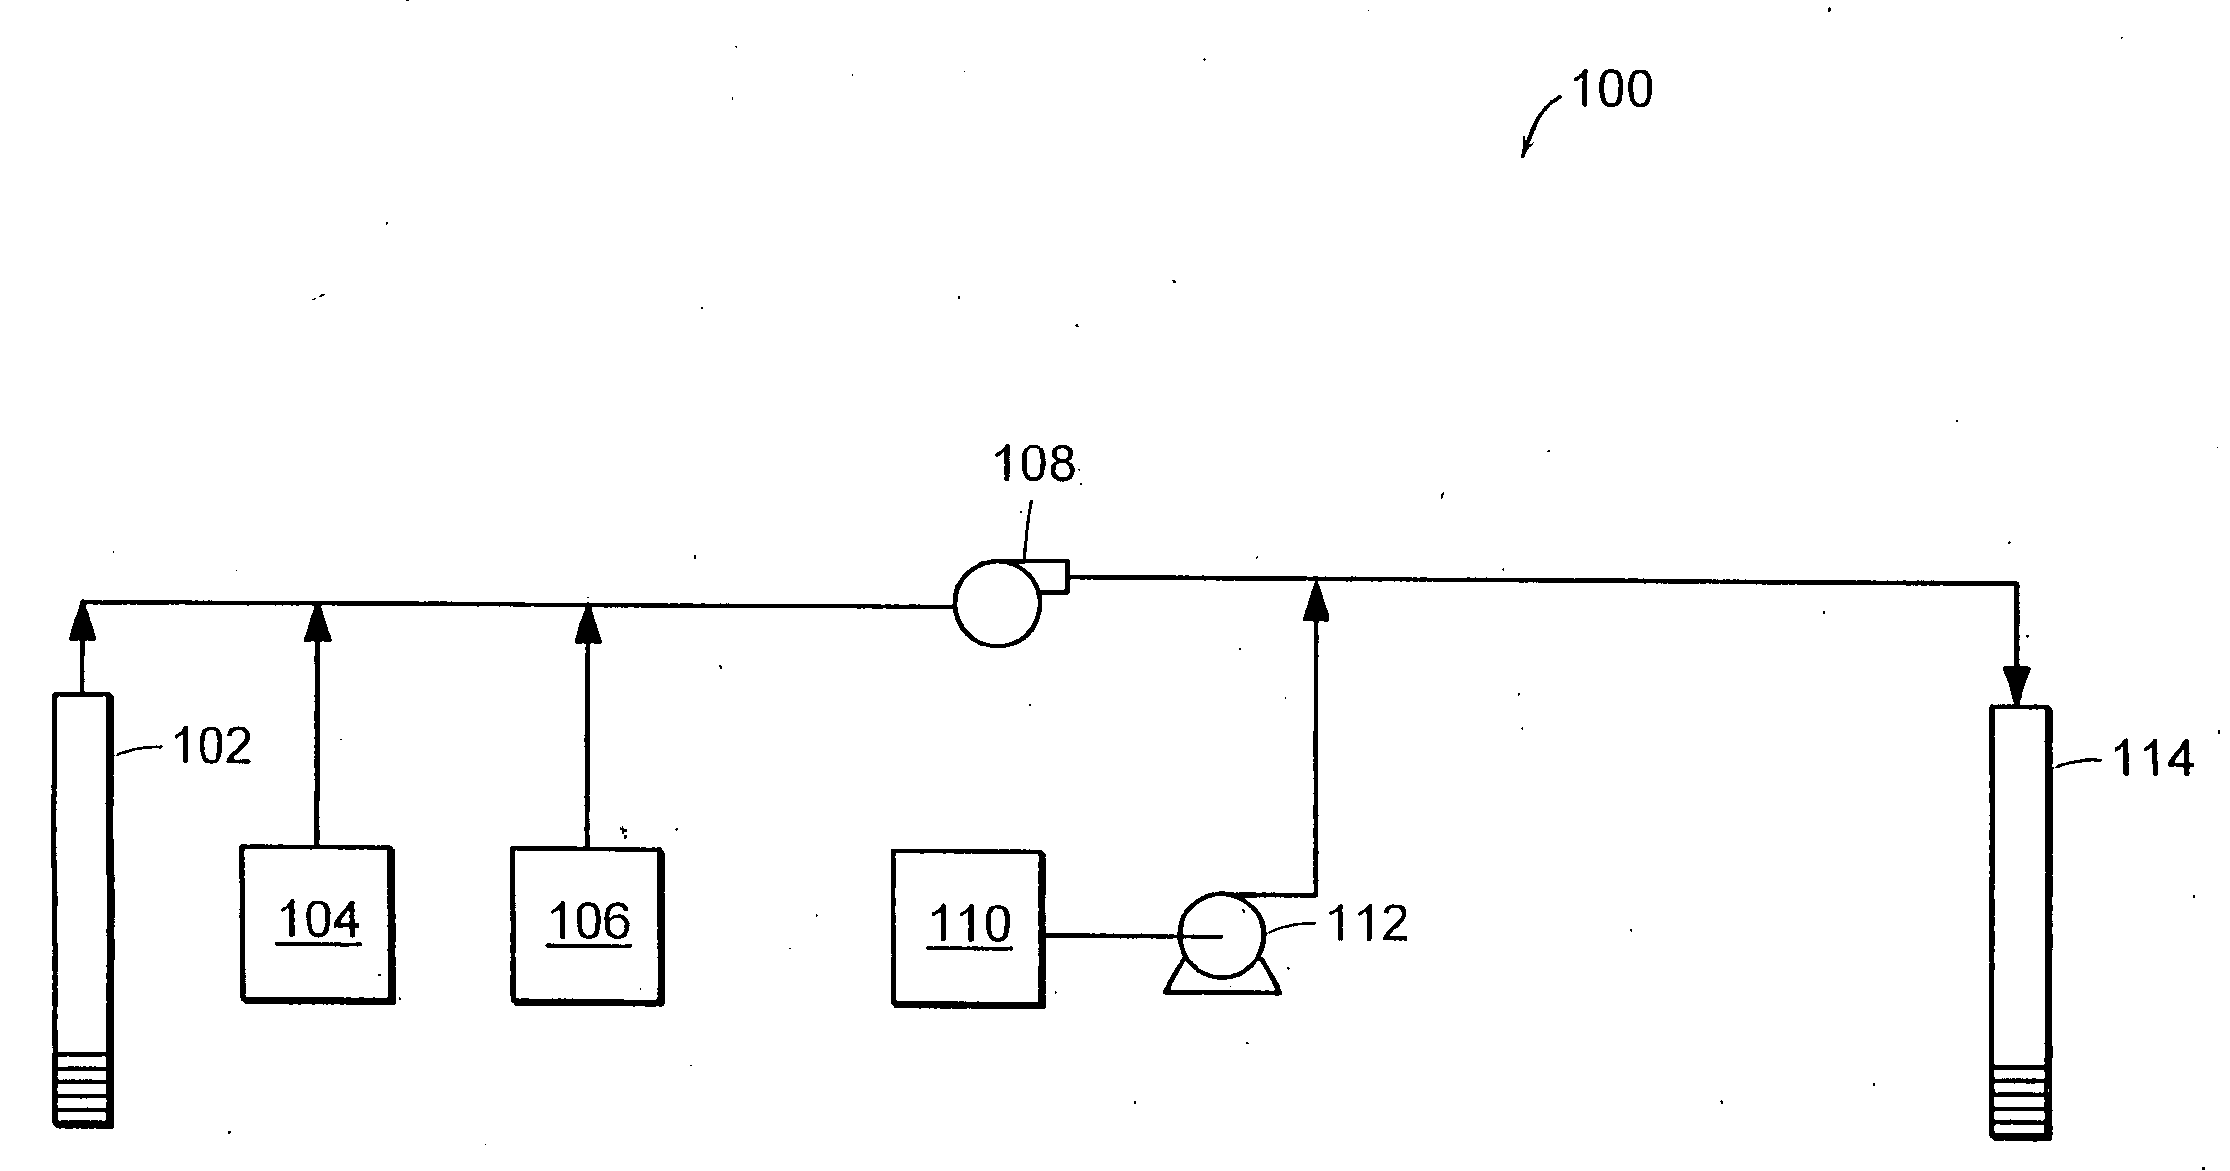 Process for in situ bioremediation of subsurface contaminants